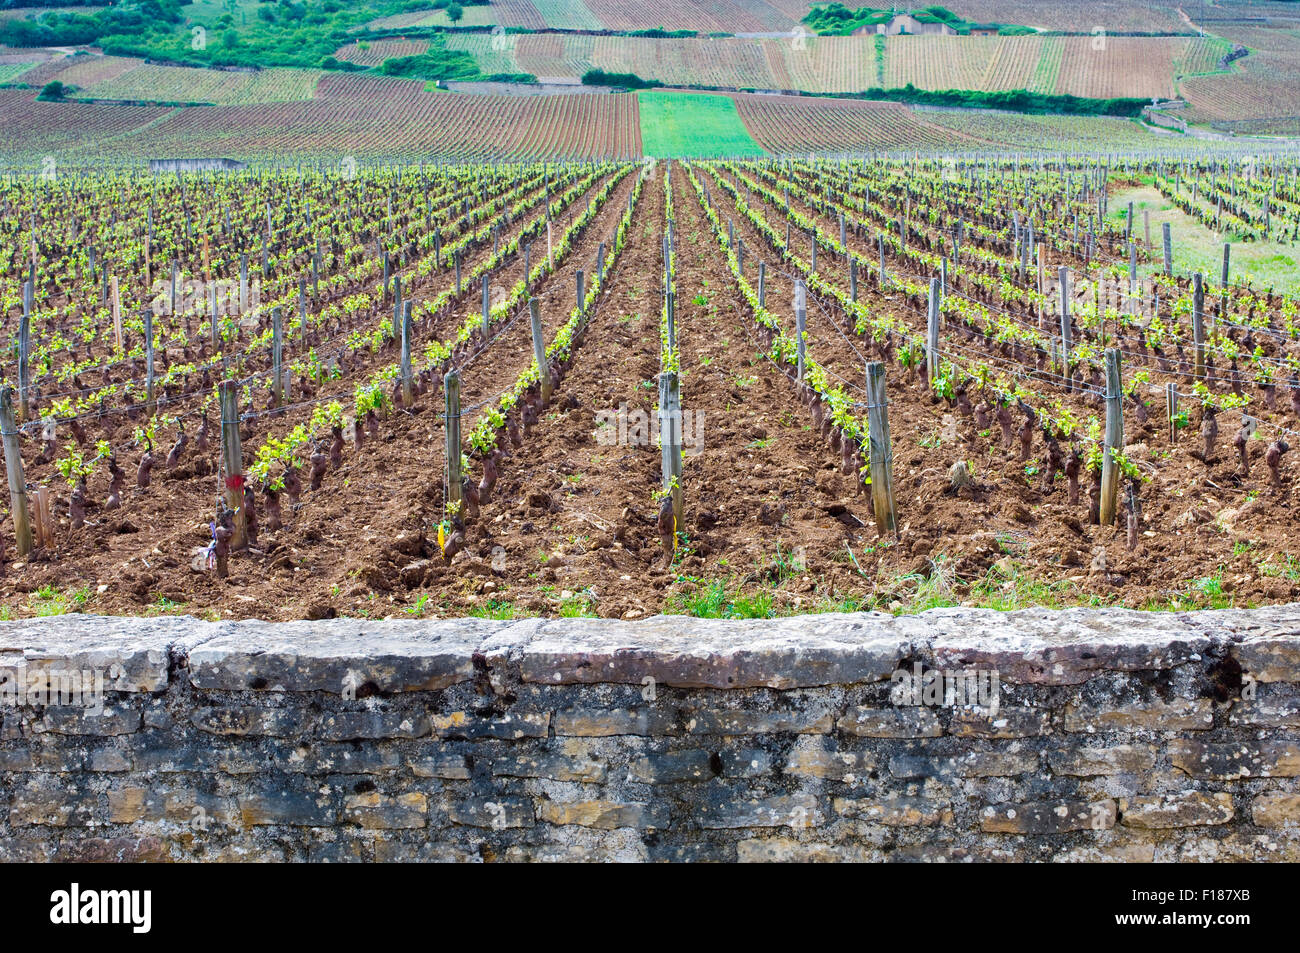 The stone wall and vineyards of Romanee-Conti in Burgundy, France Stock Photo